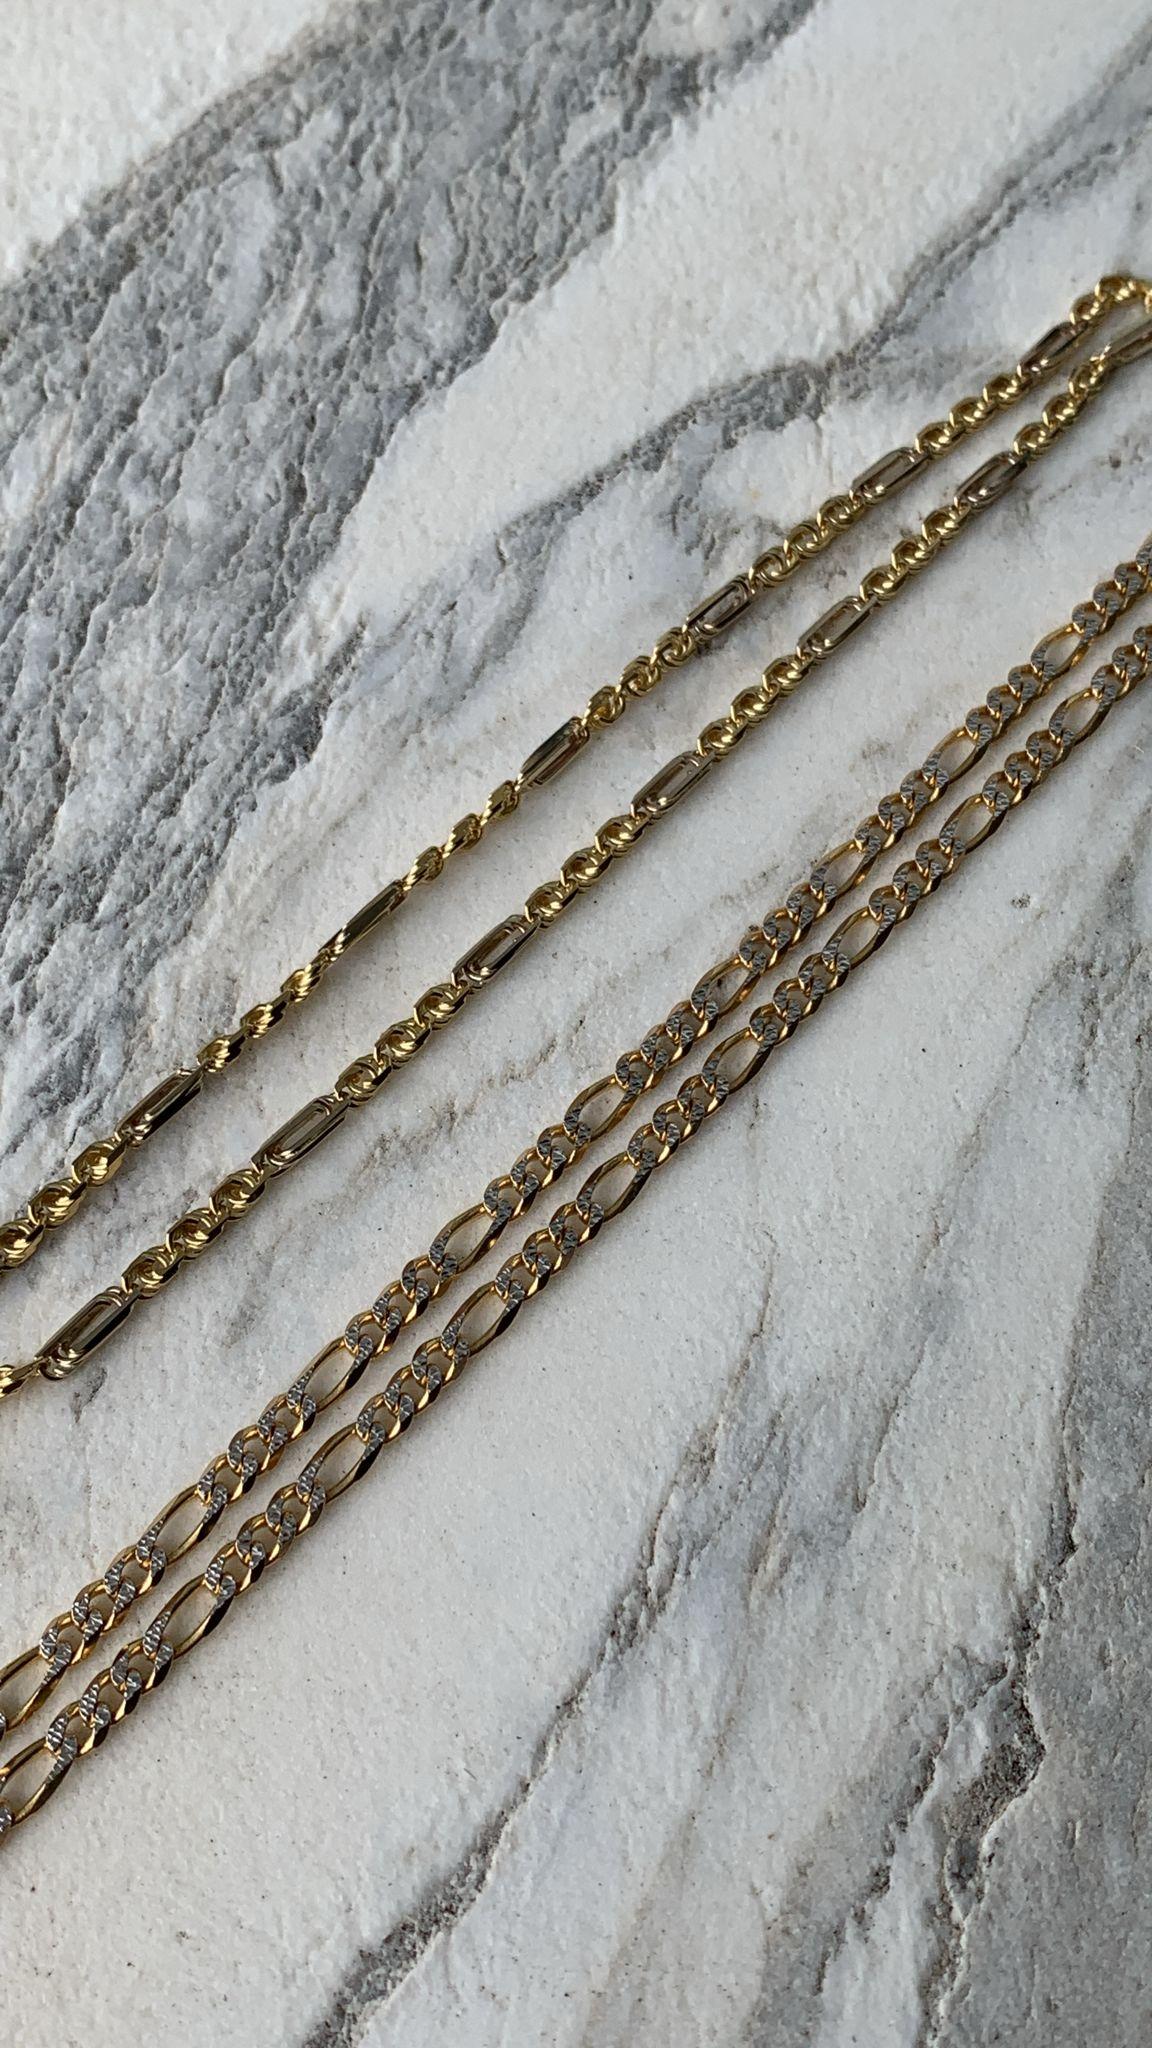 18k yellow gold curb link style chain with white gold detail  6